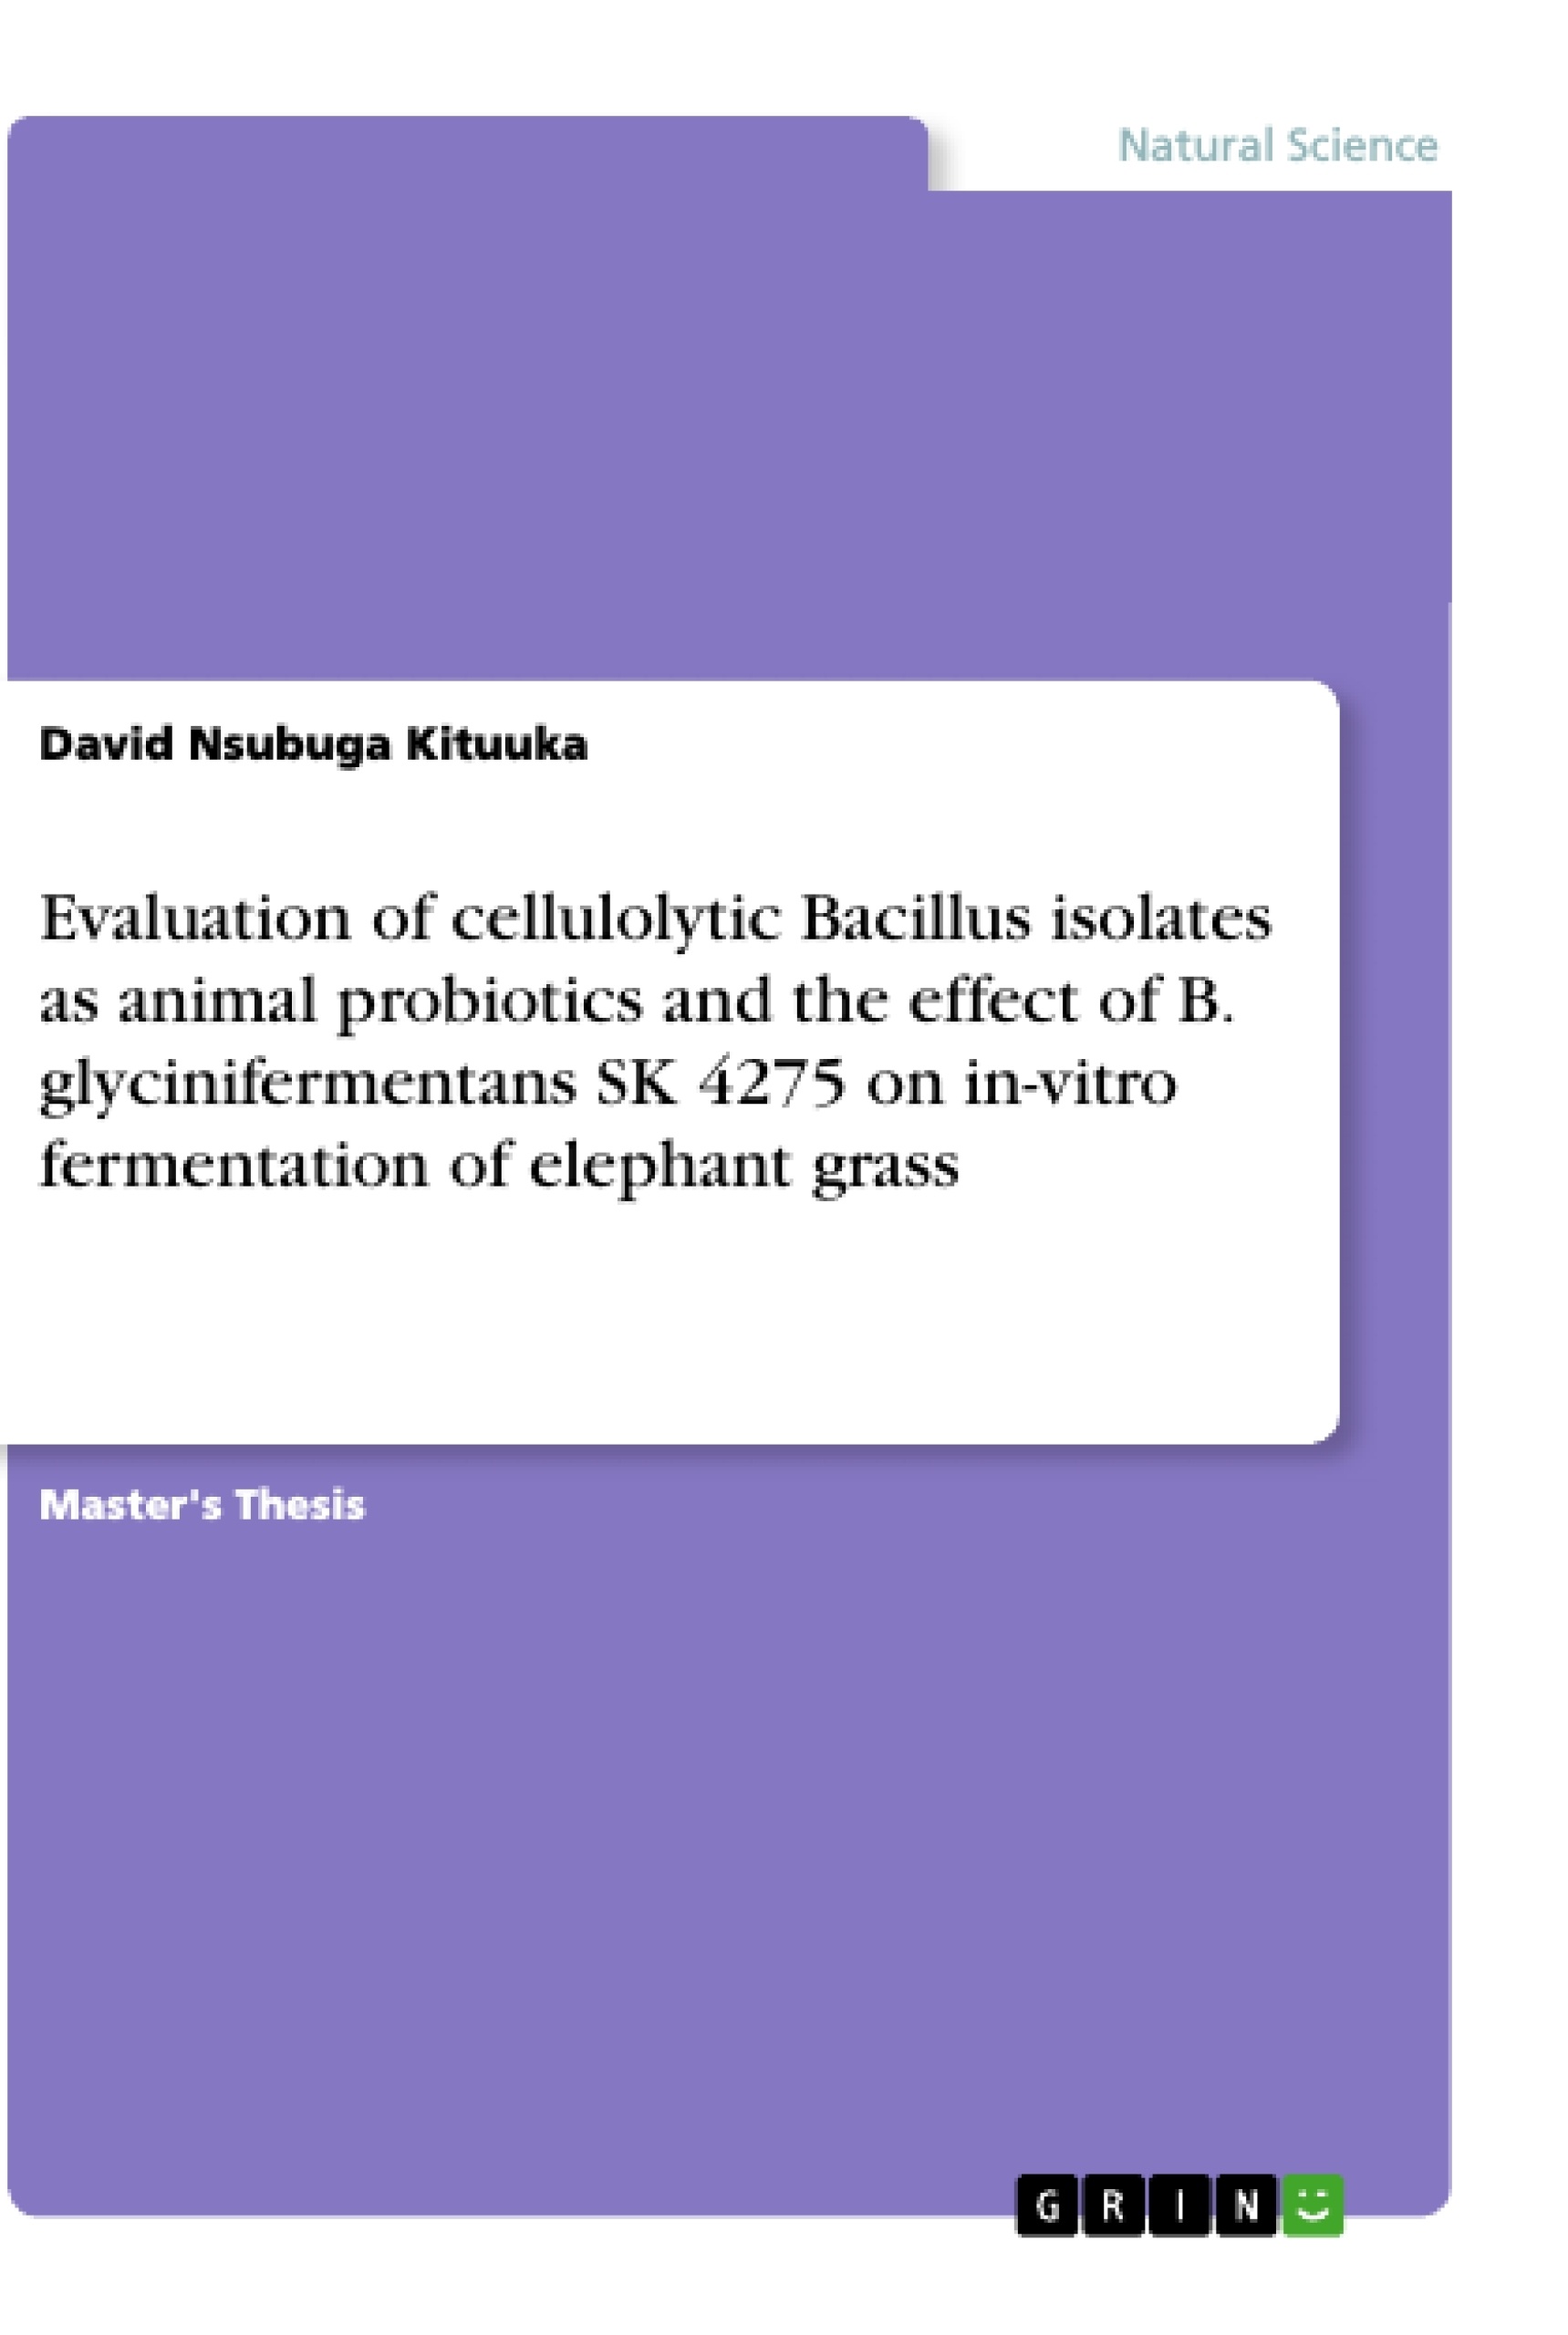 Título: Evaluation of cellulolytic Bacillus isolates as animal probiotics and the effect of B. glycinifermentans SK 4275 on in-vitro fermentation of elephant grass